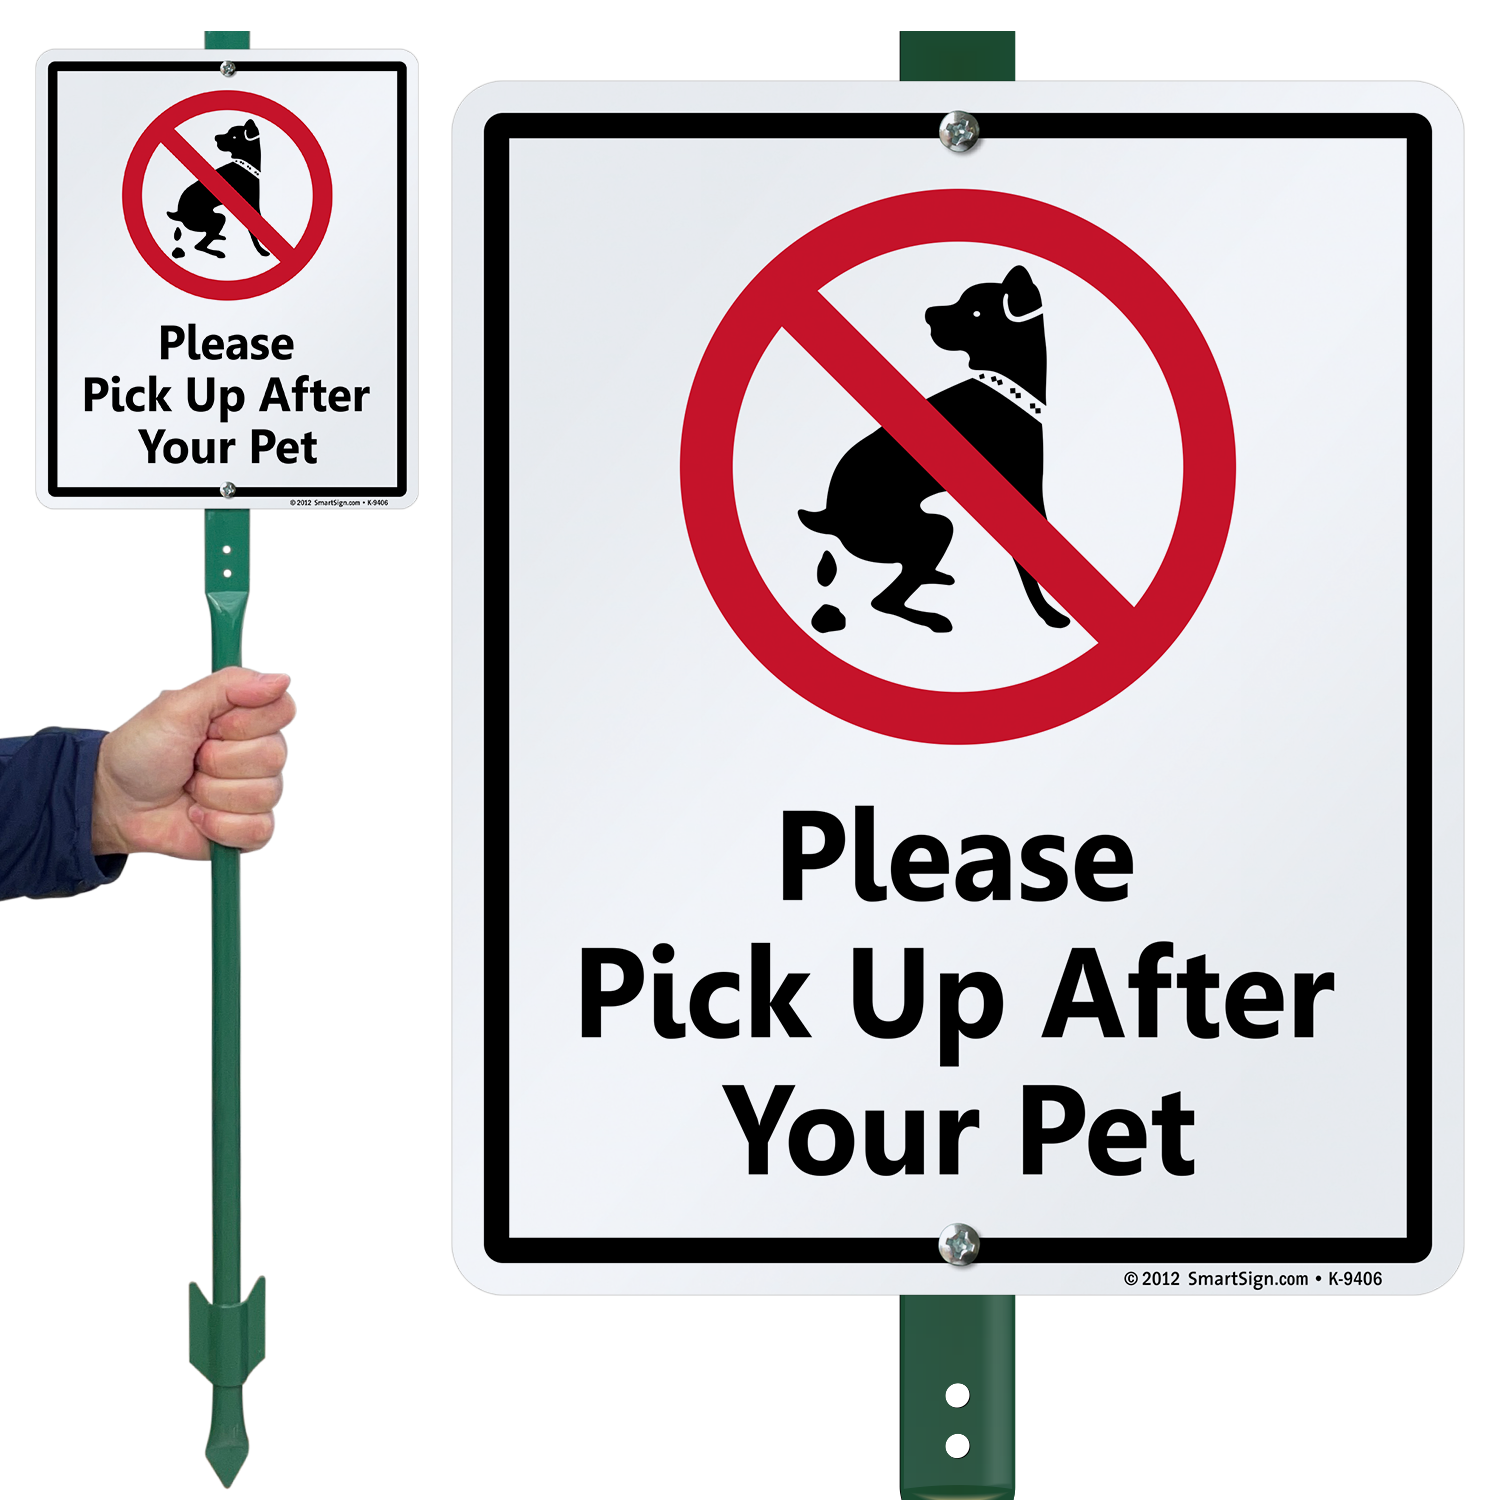 PLEASE PICK UP AFTER YOUR PETS SIGN ALUMINUM 7" BY 10" METAL NO DOG POOPING 